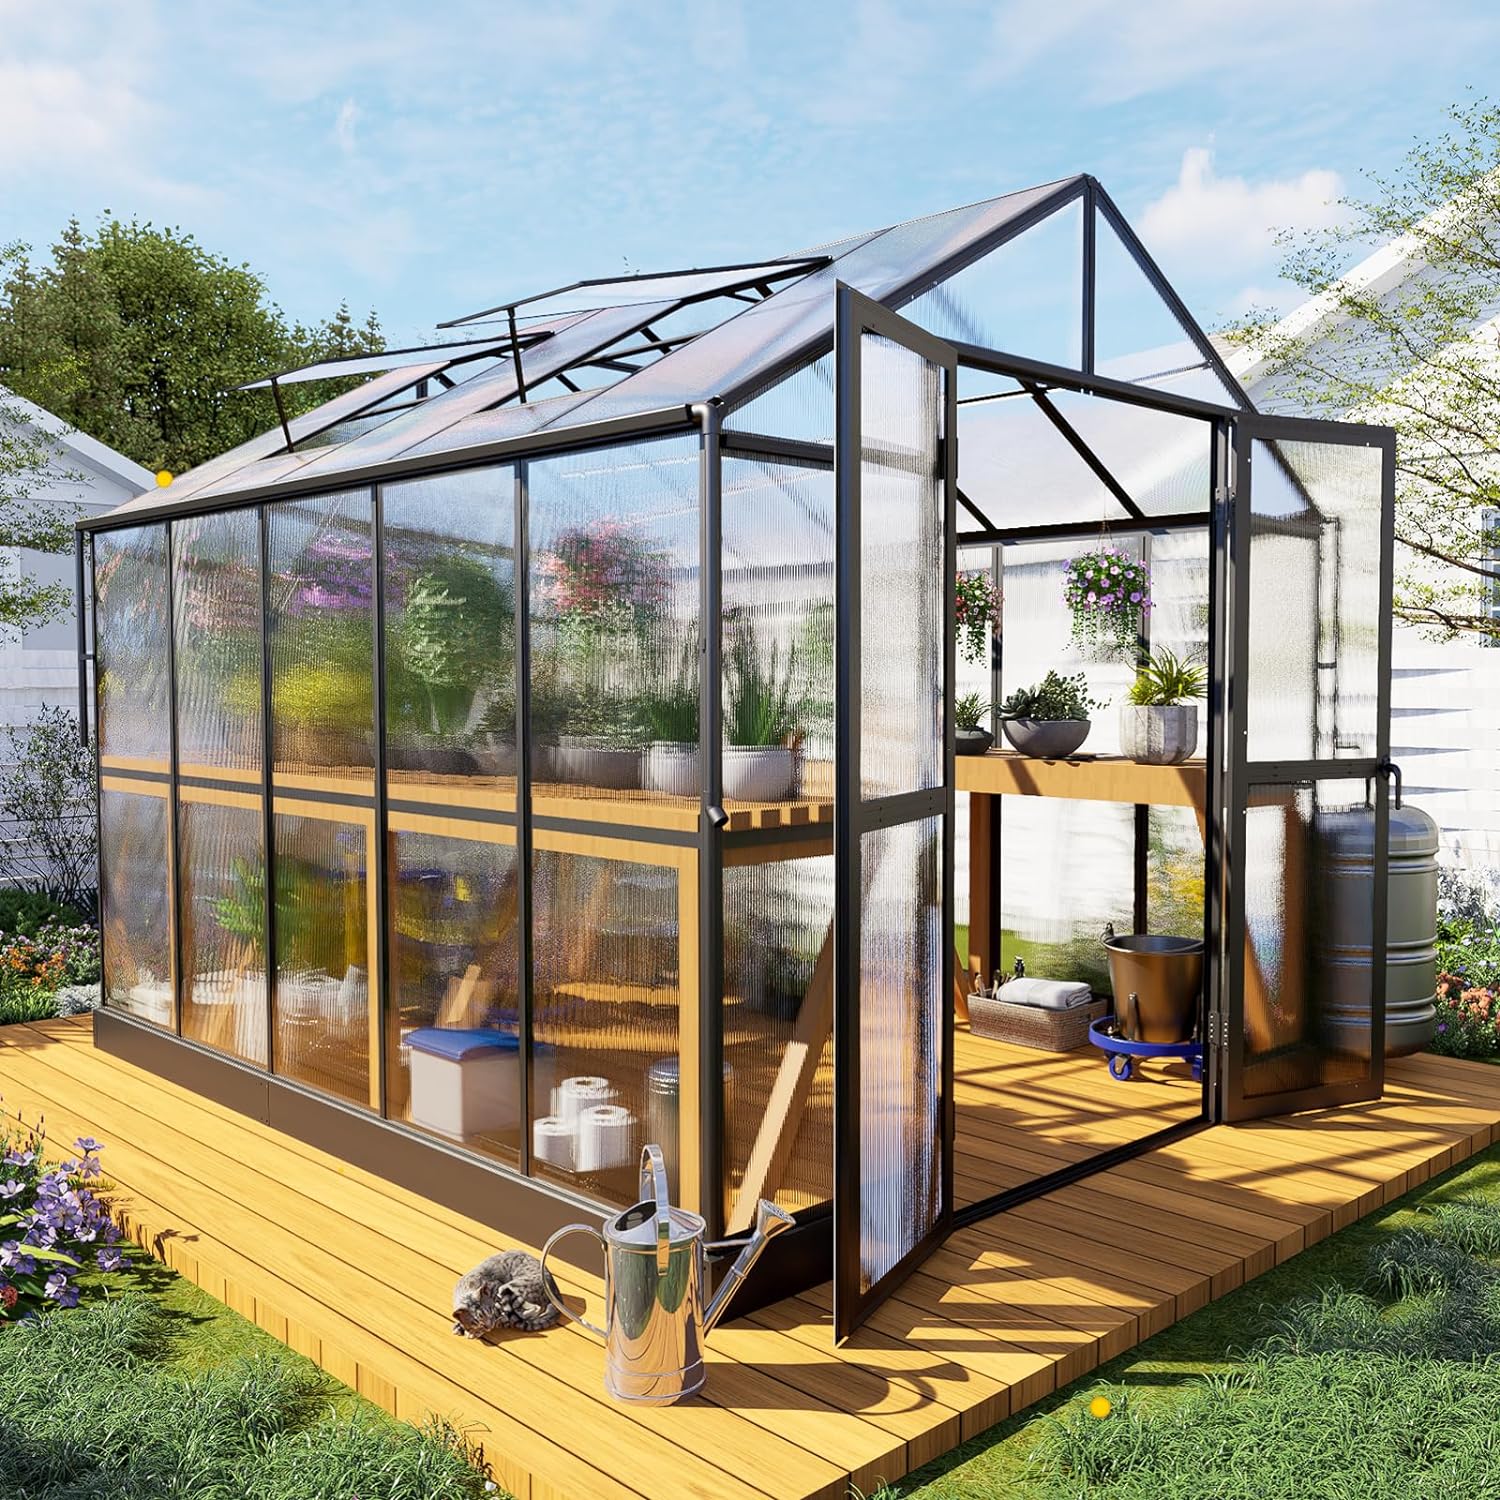 HOWE 8x10x7.5 FT Polycarbonate Greenhouse Double Swing Doors 2 Vents 5.2FT Added Wall Height, Walk-in Large Aluminum Greenhouse Sunroom Winter Greenhouse for Outdoors, Black